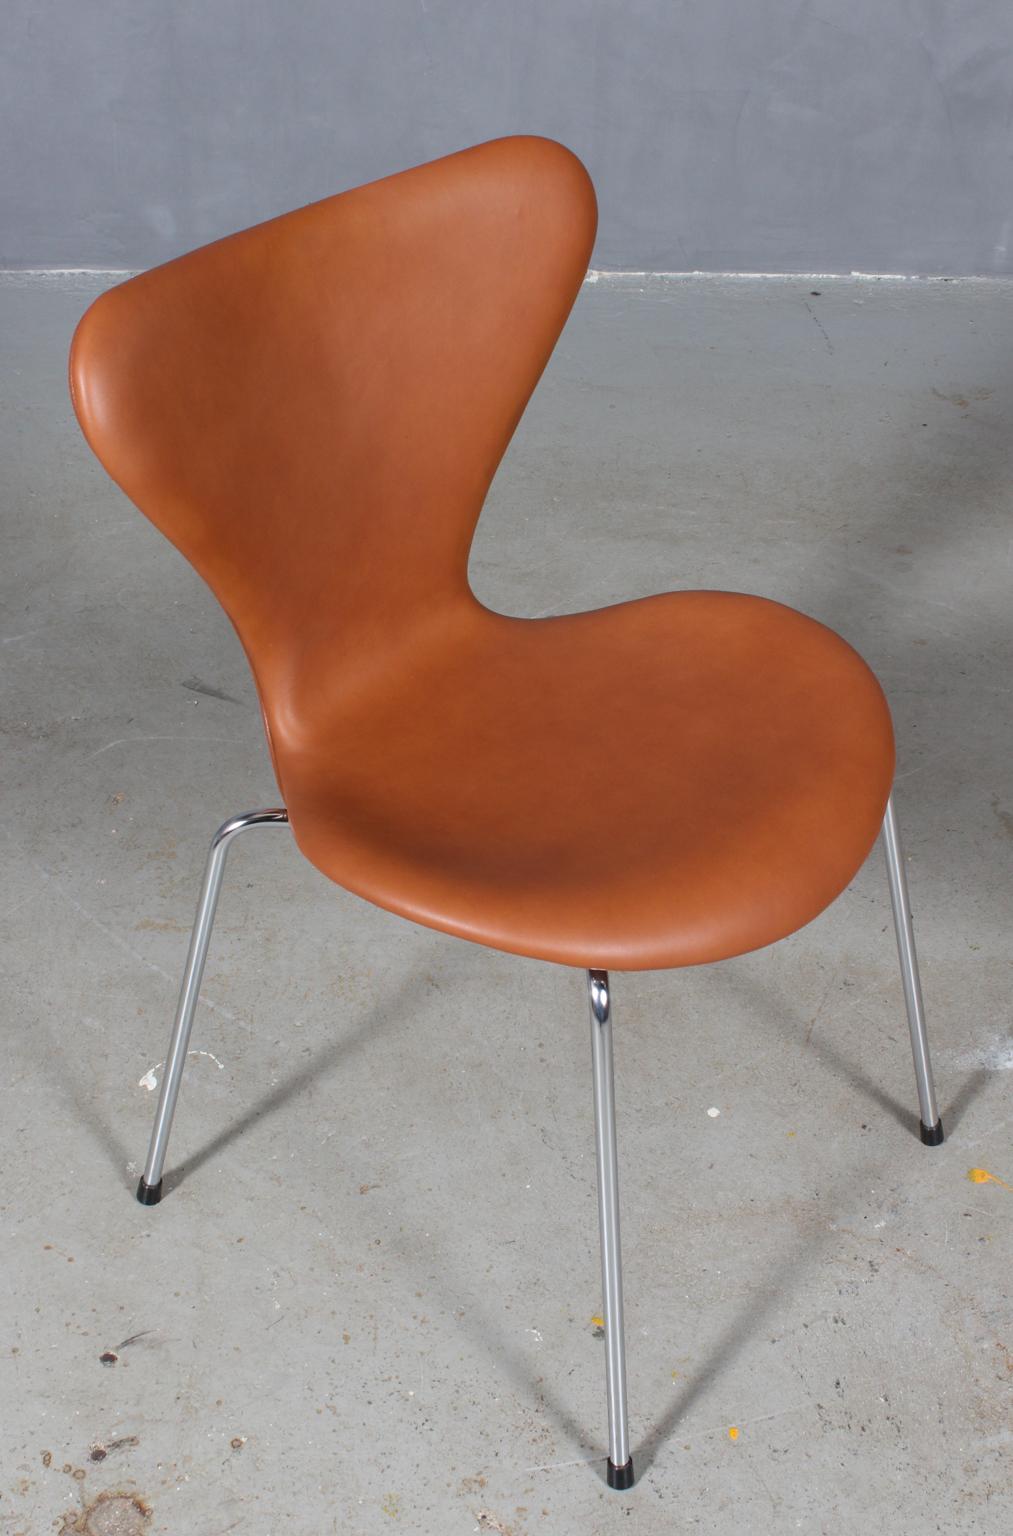 Arne Jacobsen dining chair new upholstered with cognac pure aniline leather.

Base of chrome steel tube.

Model 3107 Syveren, made by Fritz Hansen.